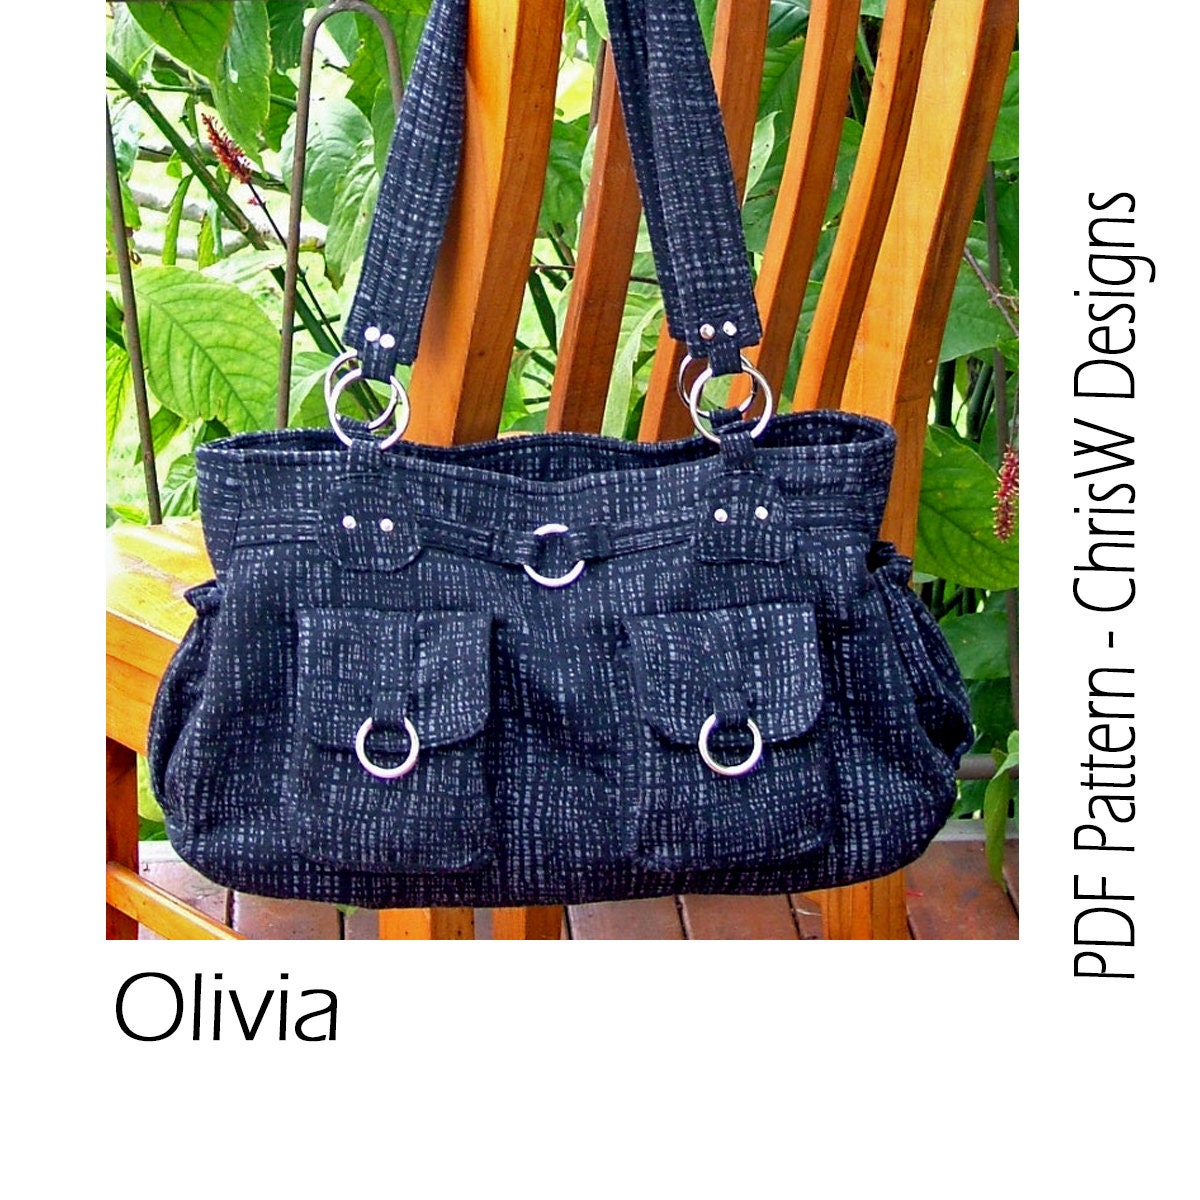 Purse PDF pattern for a Handbag Olivia bag with by ChrisWDesigns